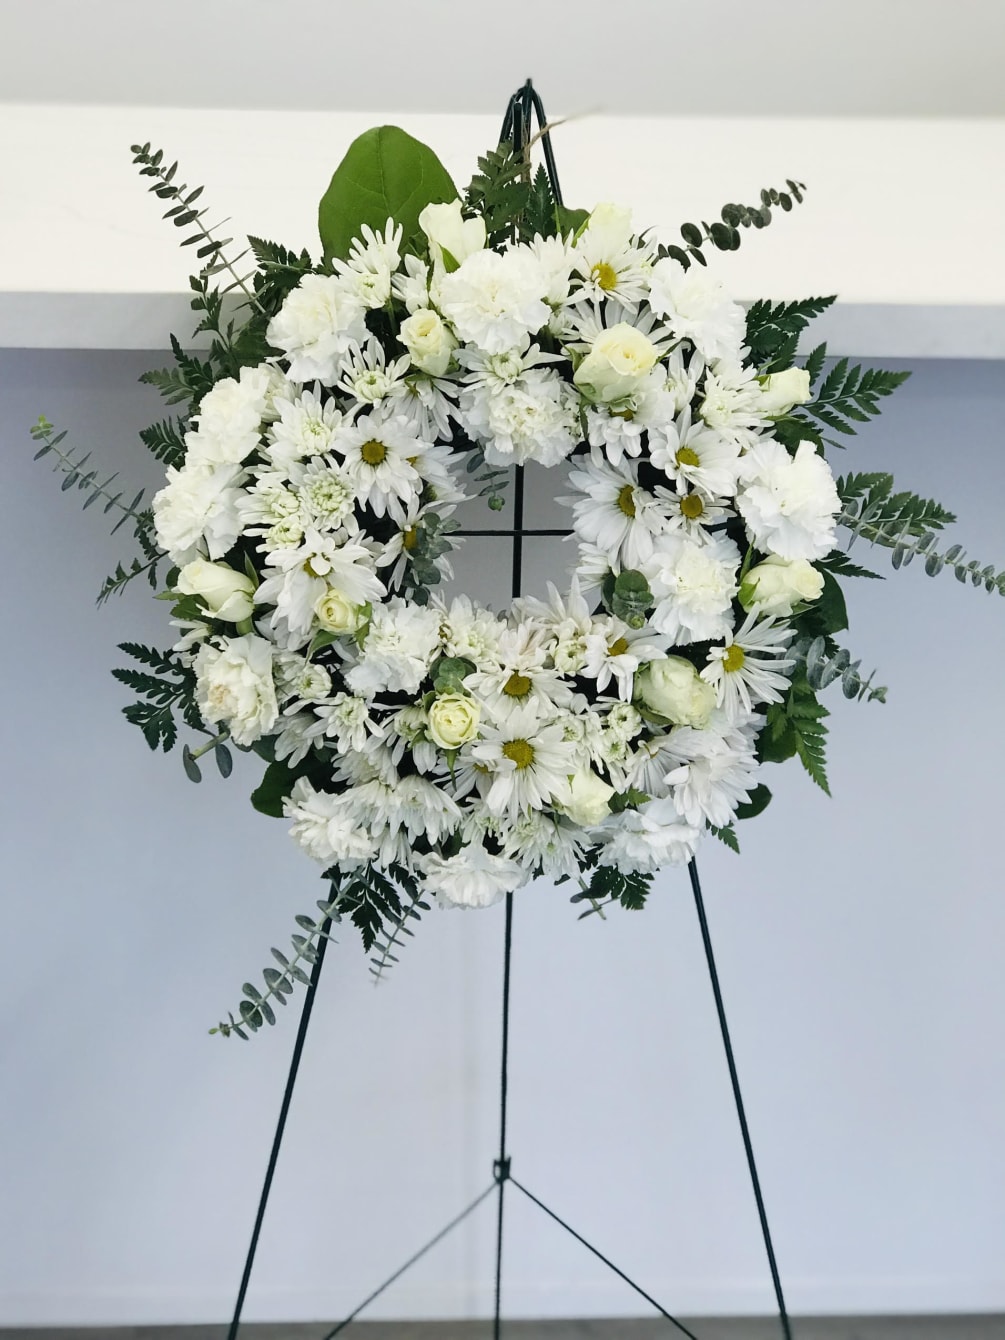 Standing white wreath complete with daisies, carnations, and roses to honor the